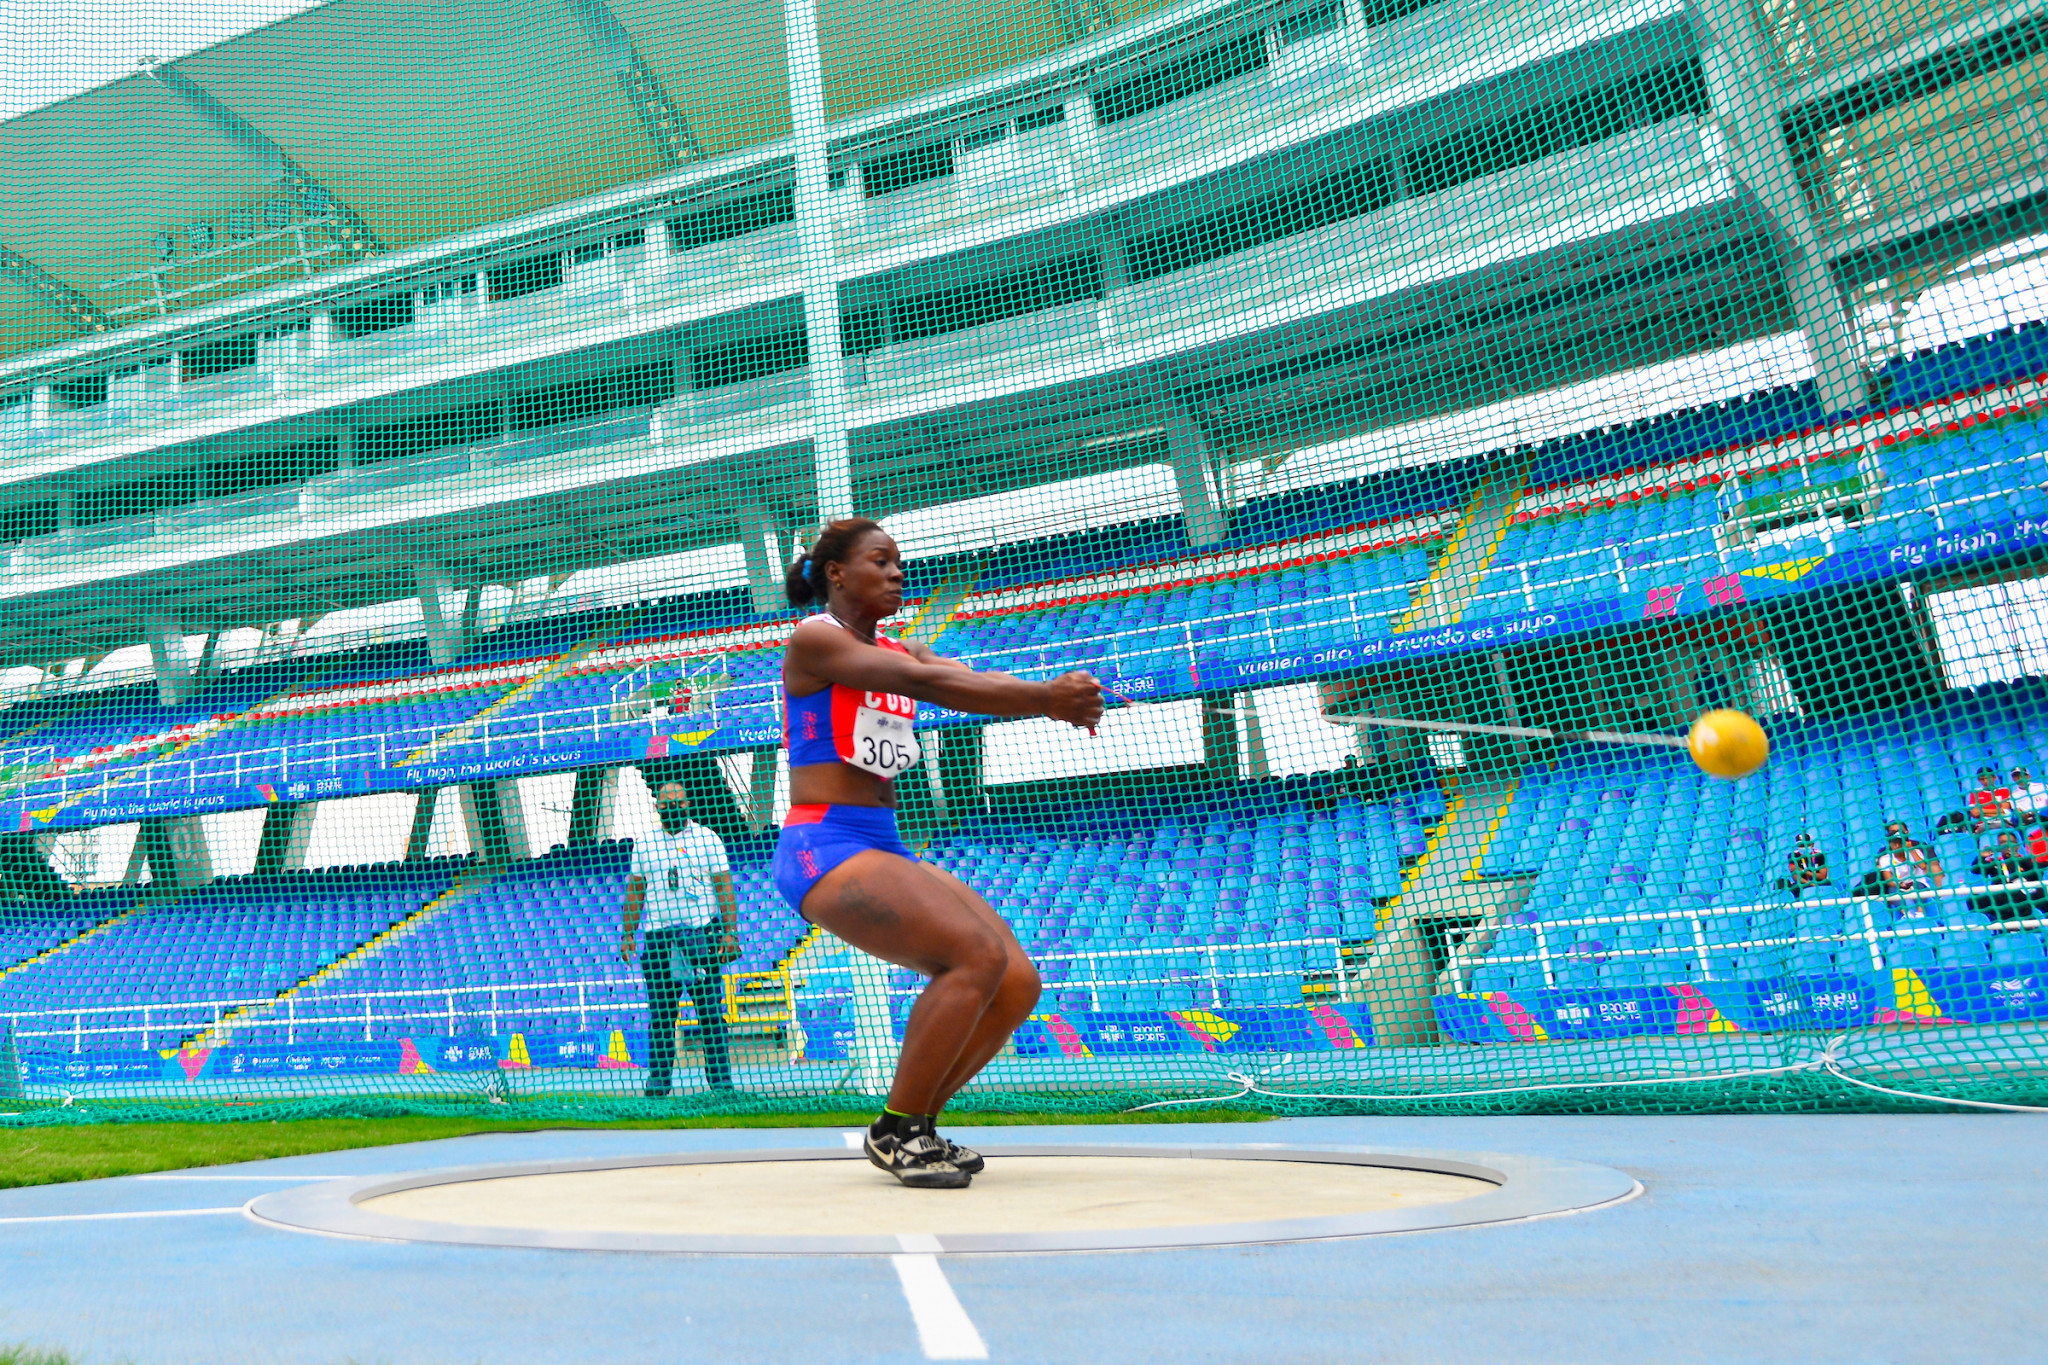 Cuba's Yaritza Martinez recorded a personal best of 67.47 metres to win gold in the women's hammer throw ©Agencia.Xpress Media